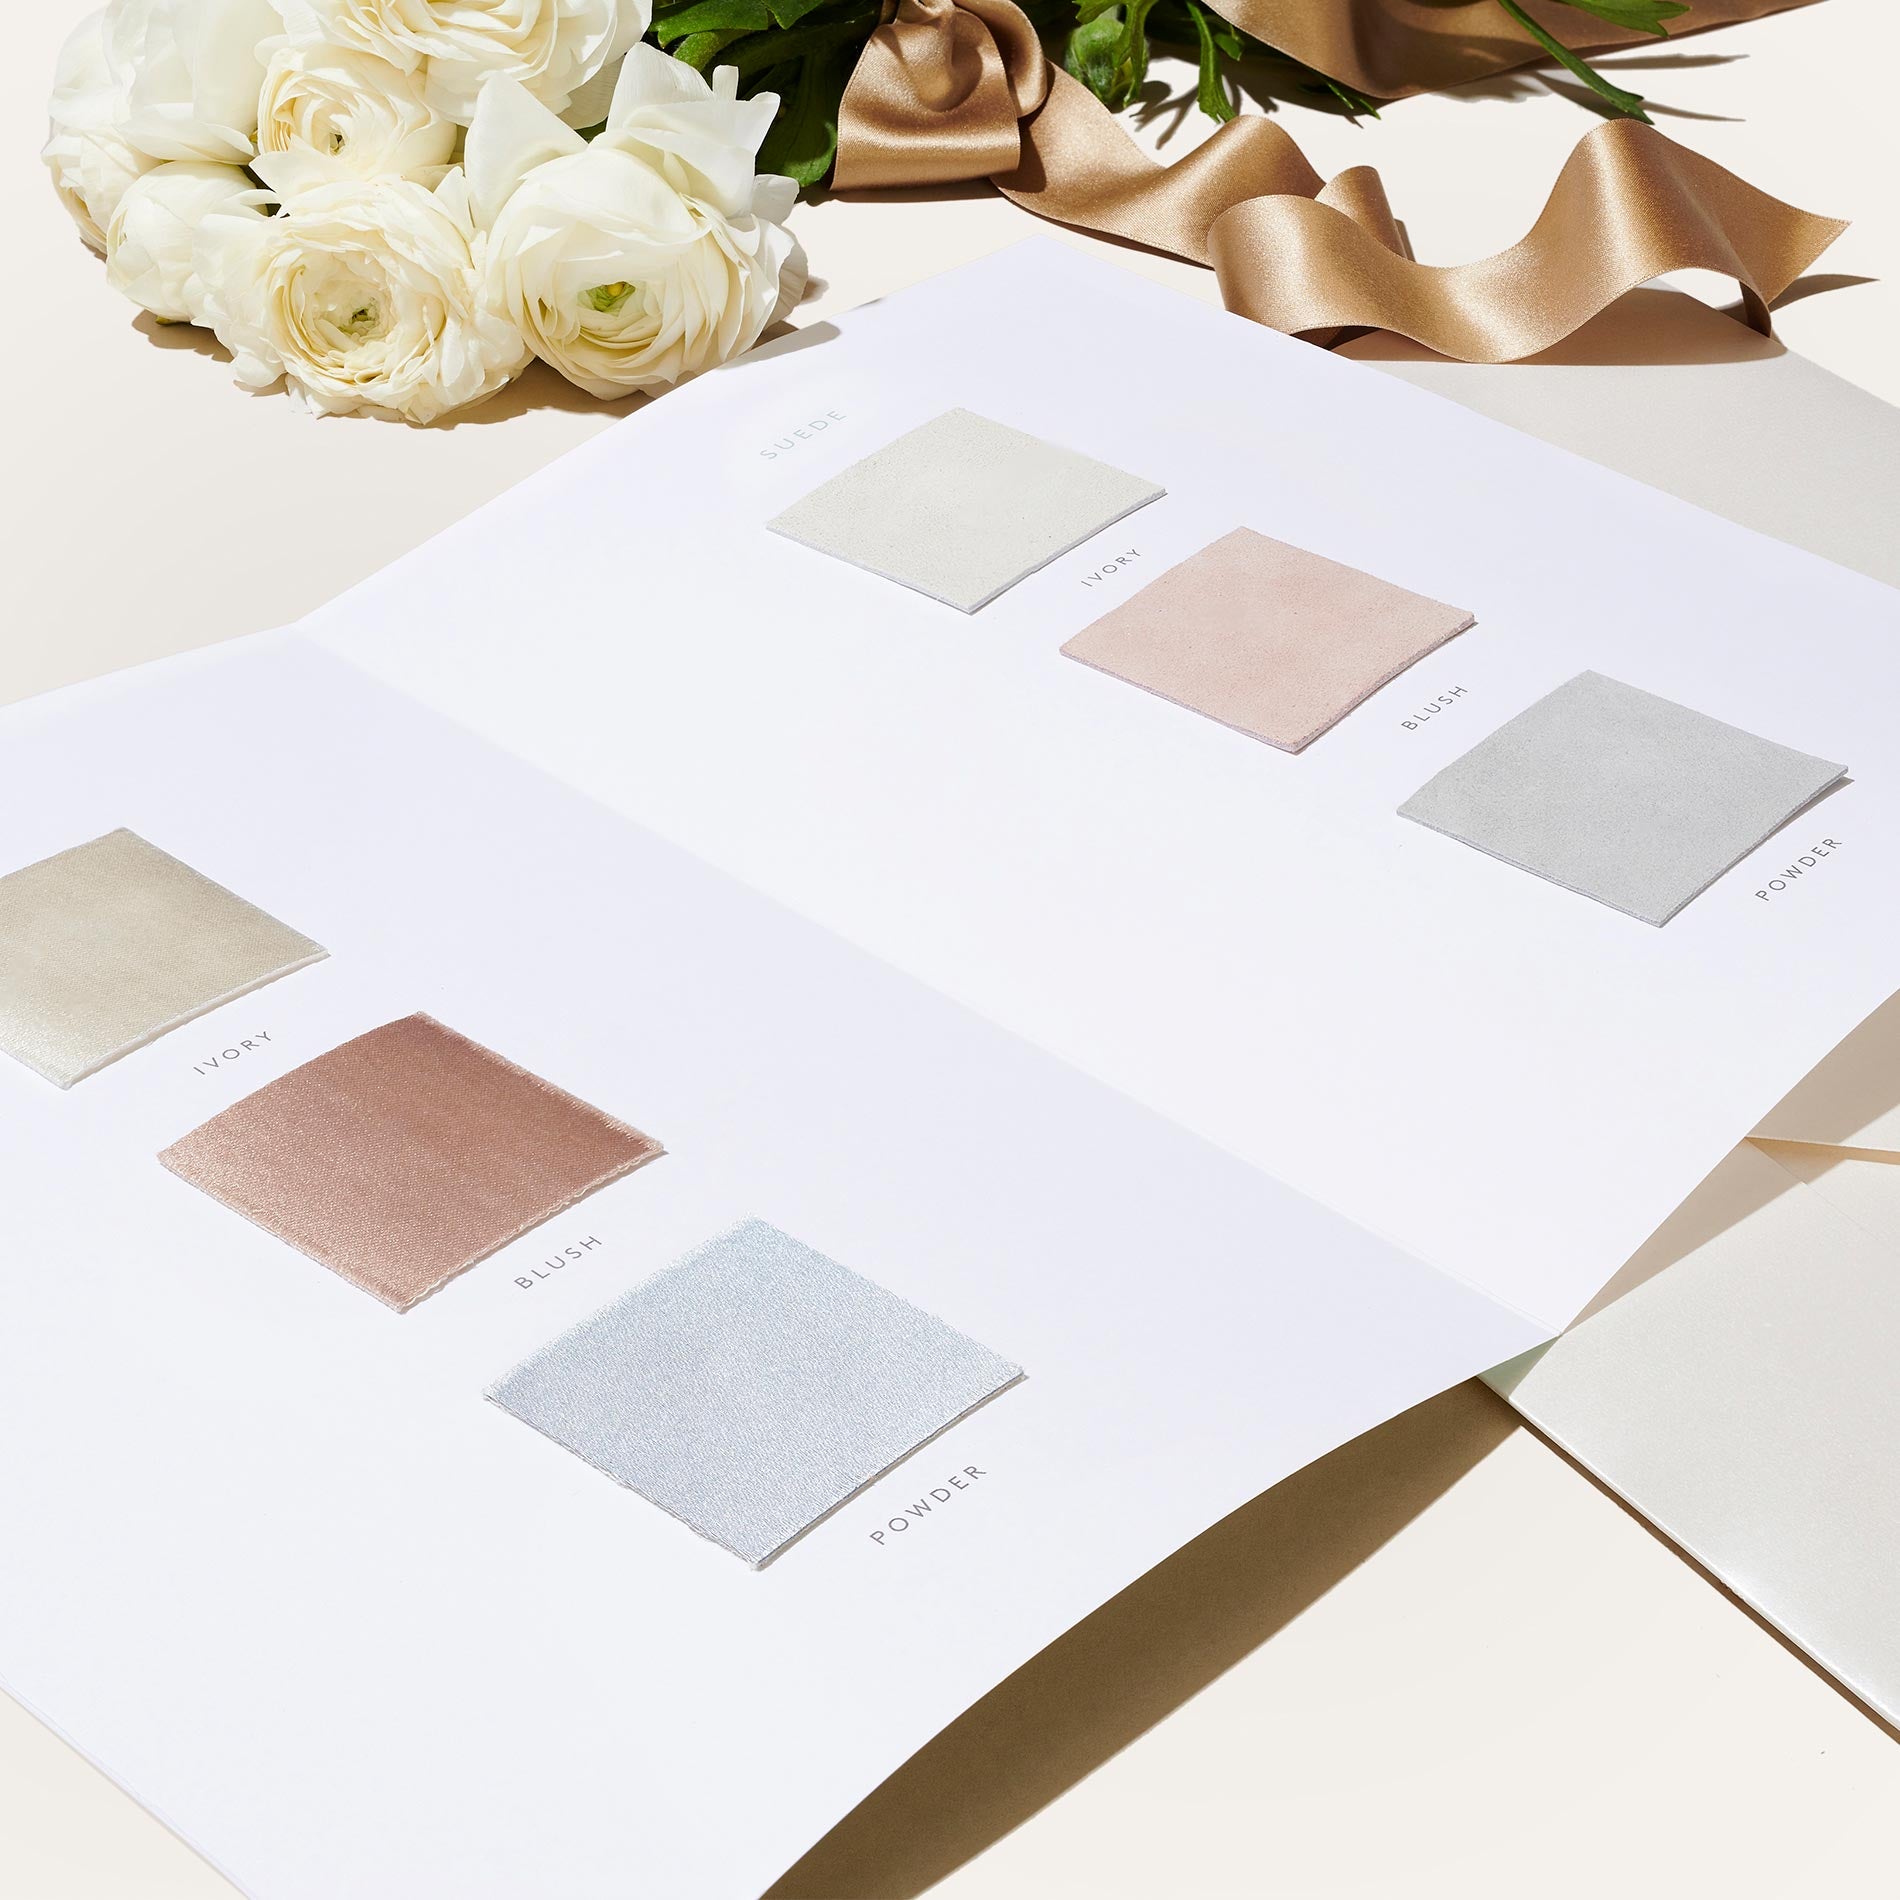 Booklet of fabric and leather swatches for designing custom Margaux bridal shoes